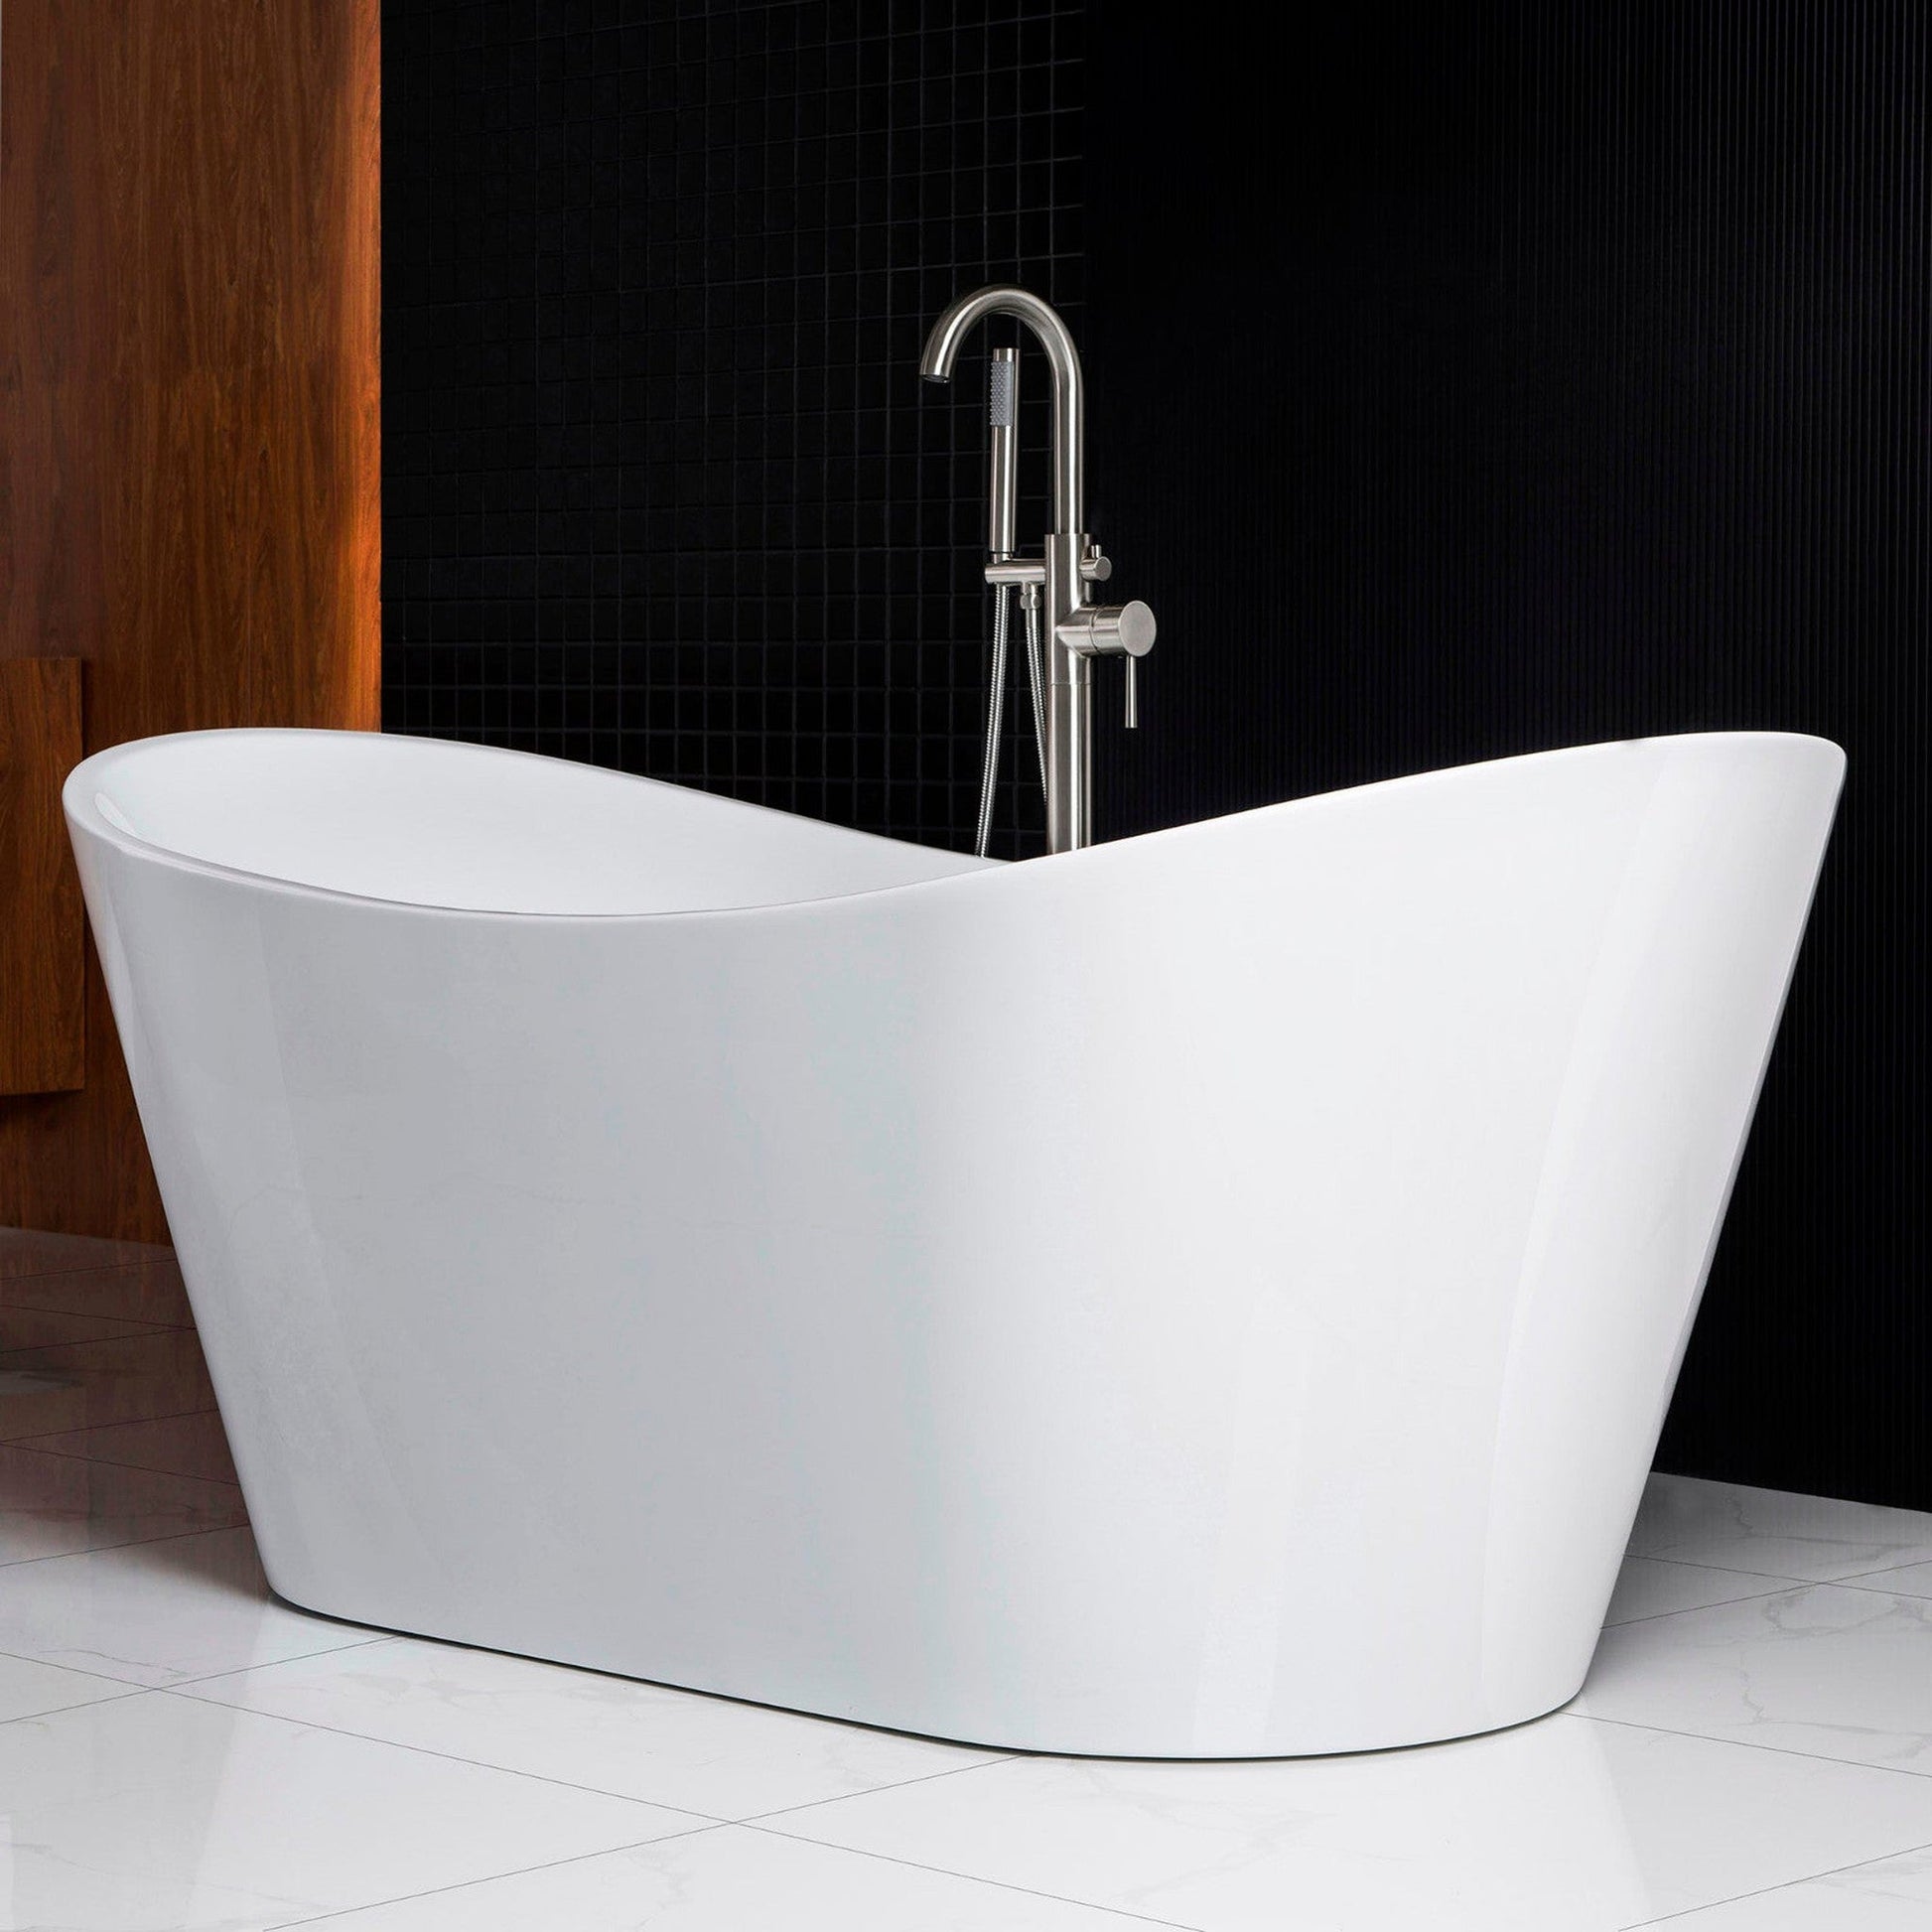 WoodBridge B0010 67" White Acrylic Freestanding Contemporary Soaking Bathtub With Chrome Drain, Overflow, F0071CHRD Tub Filler and Caddy Tray